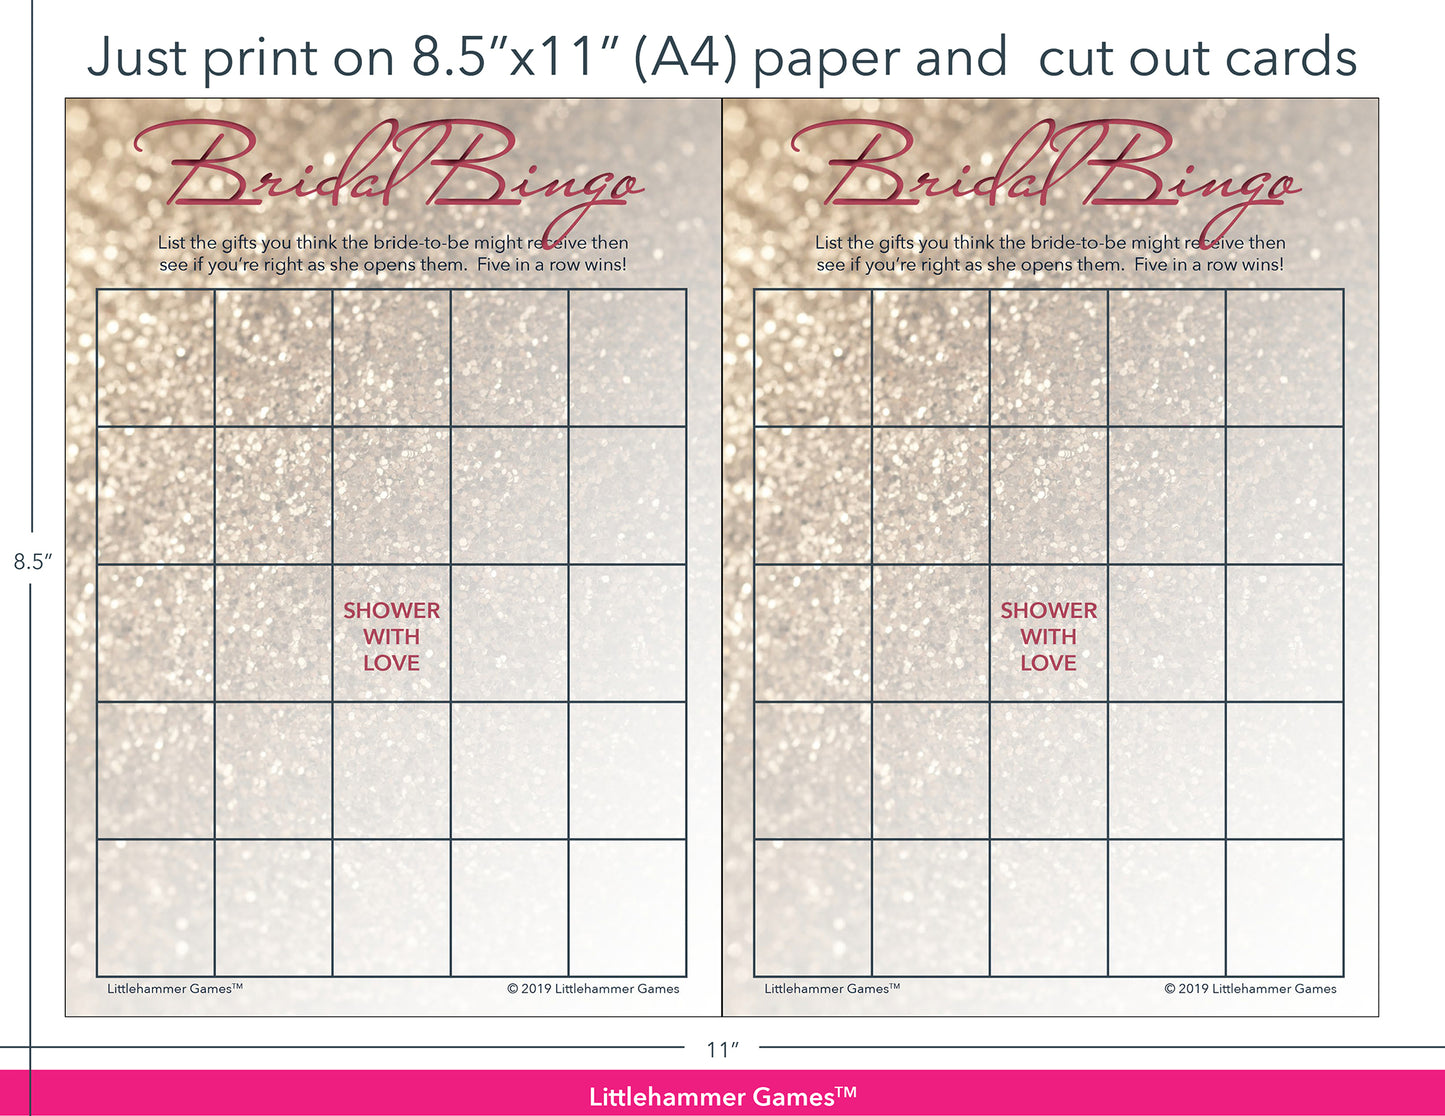 Glittery rose gold Bridal Gift Bingo game cards with printing instructions